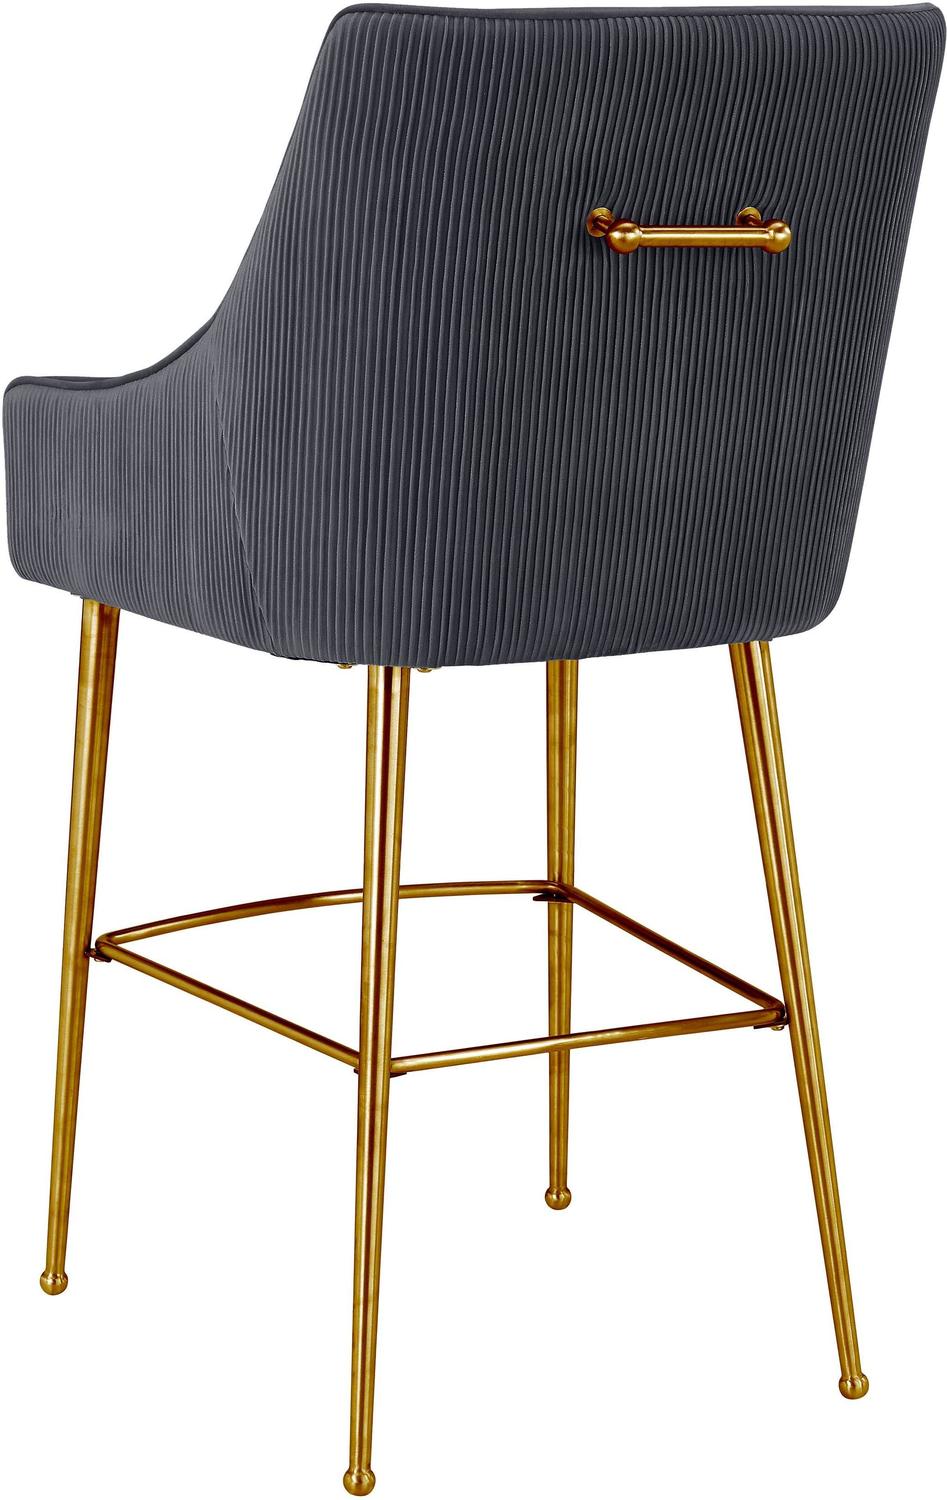 grey bar stools with backs and arms Contemporary Design Furniture Stools Grey